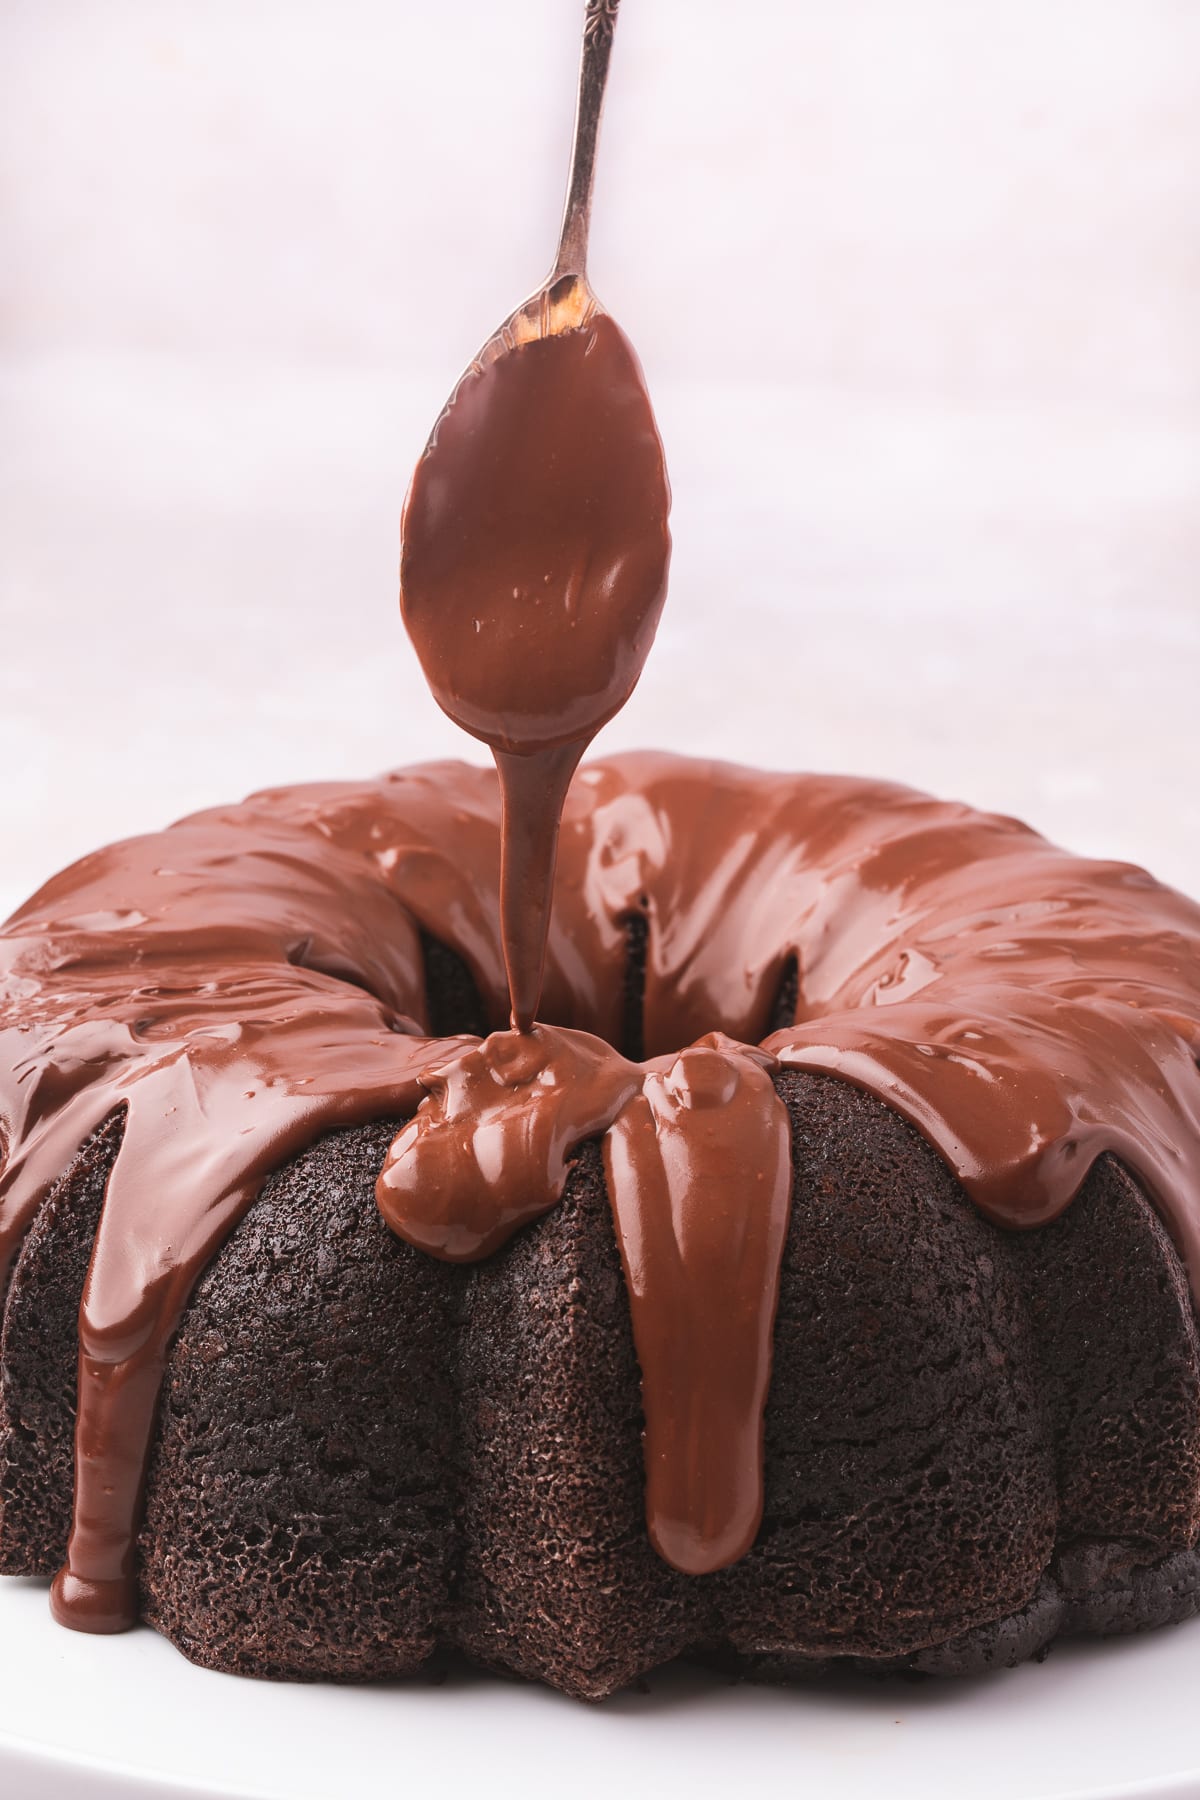 A spoon drizzling chocolate ganache over chocolate bundt cake